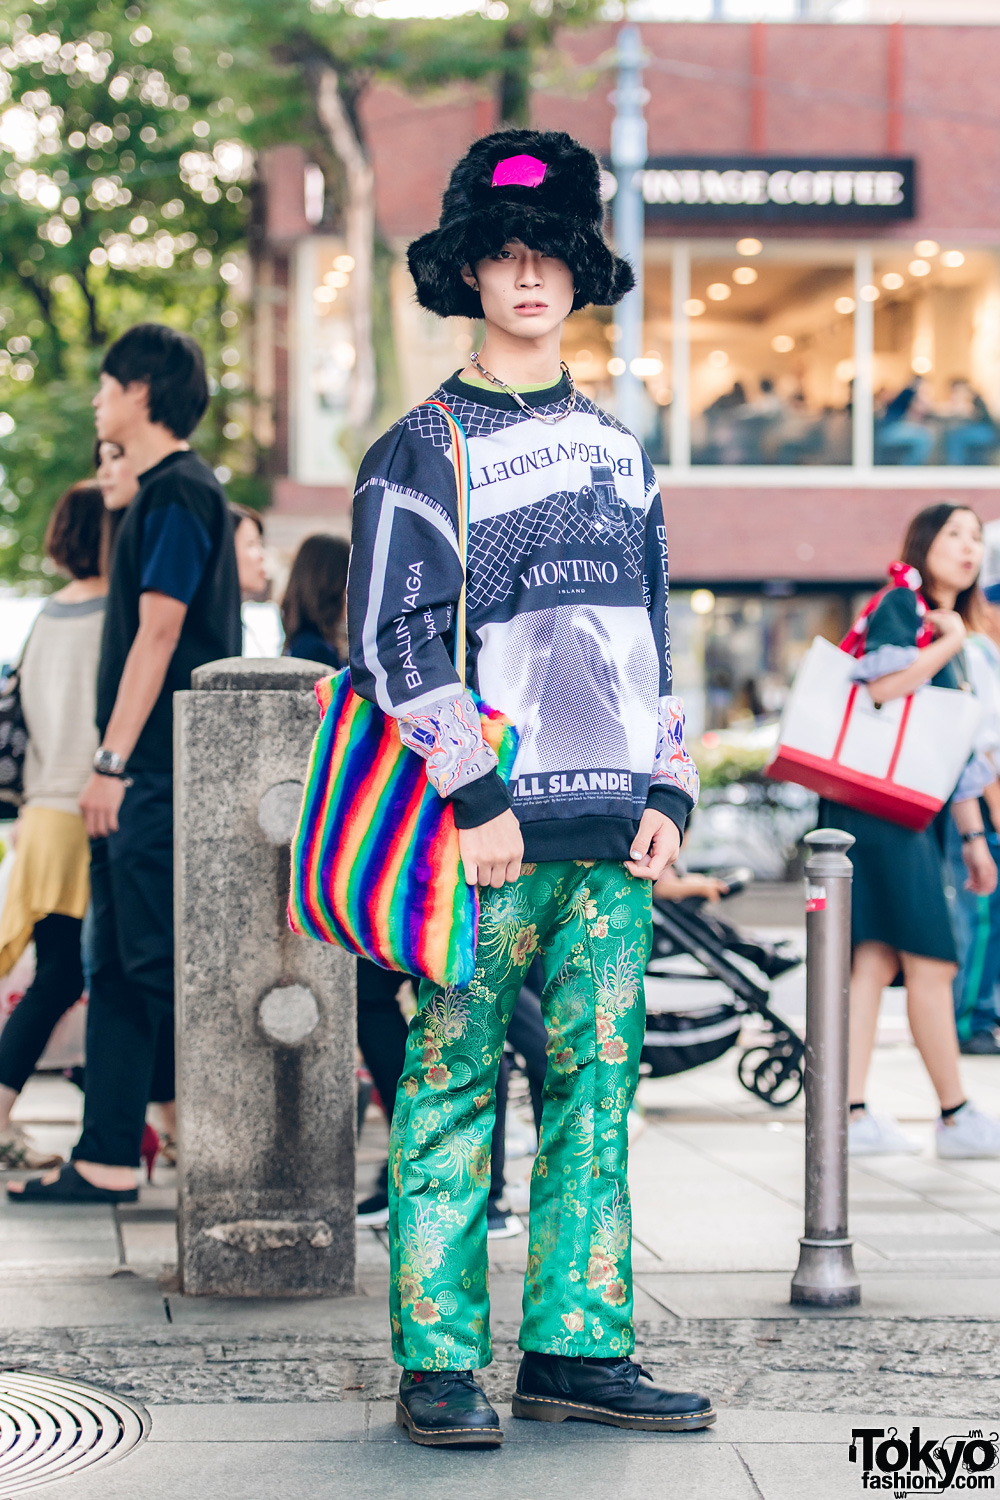 Harajuku Guy in Faux Fur Hat, Graphic Top, Floral Pants, & Rainbow Striped Bag